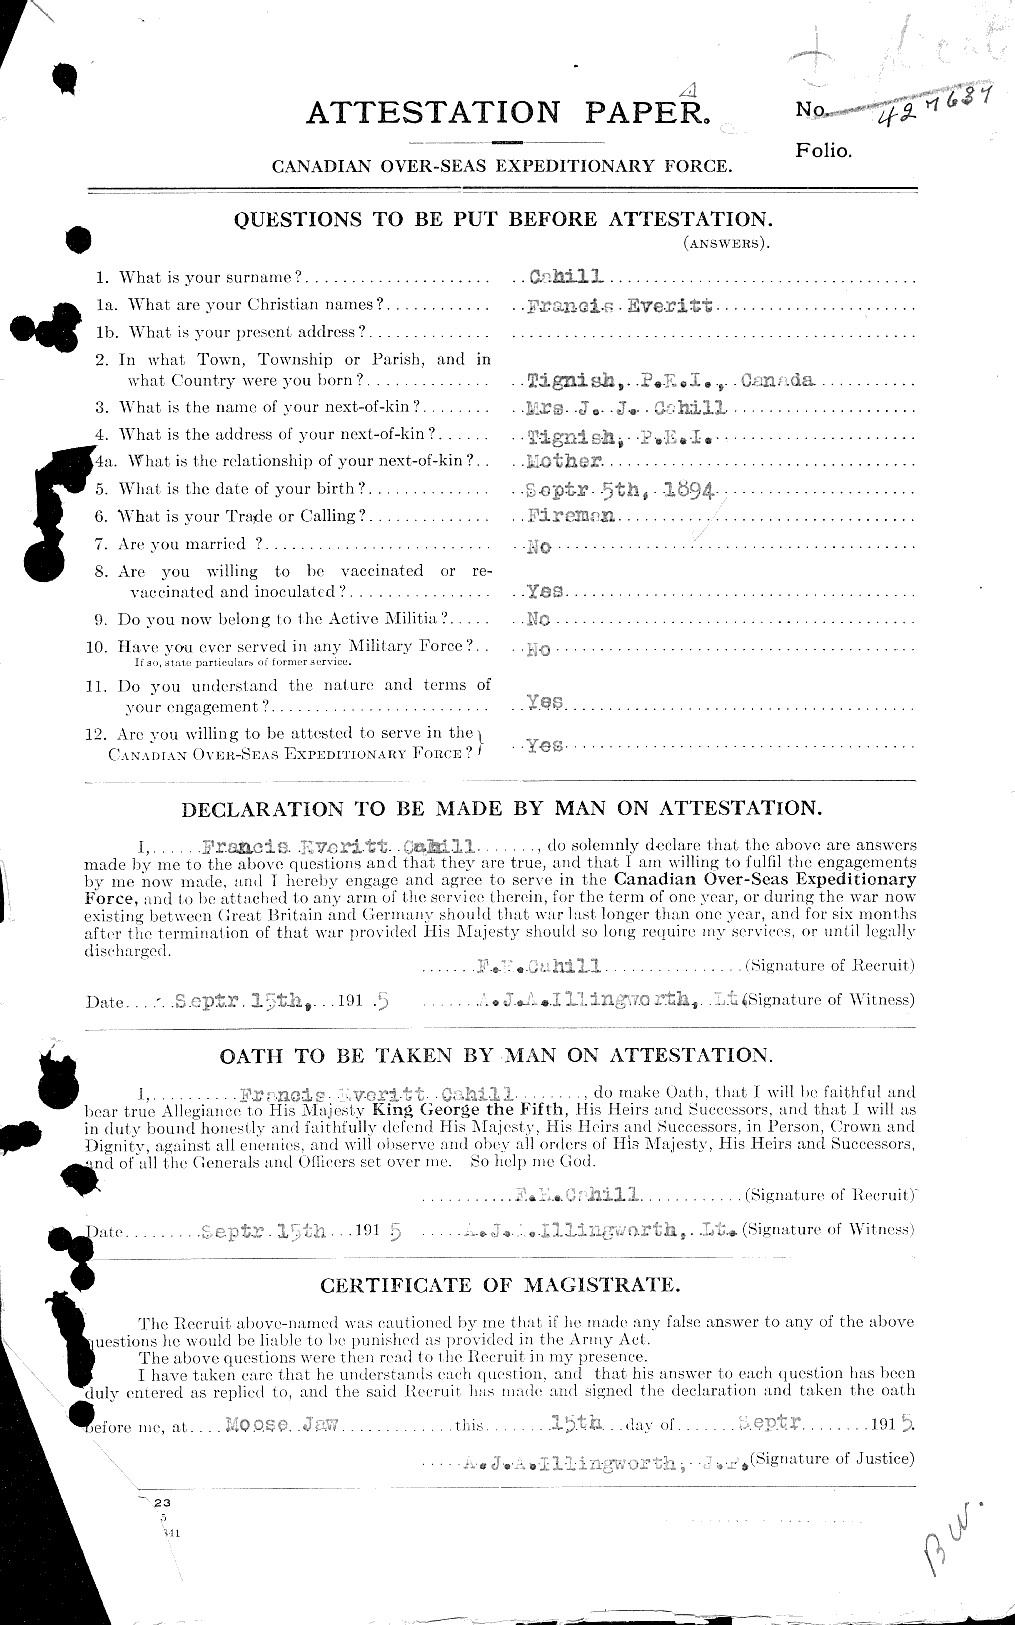 Personnel Records of the First World War - CEF 000233a